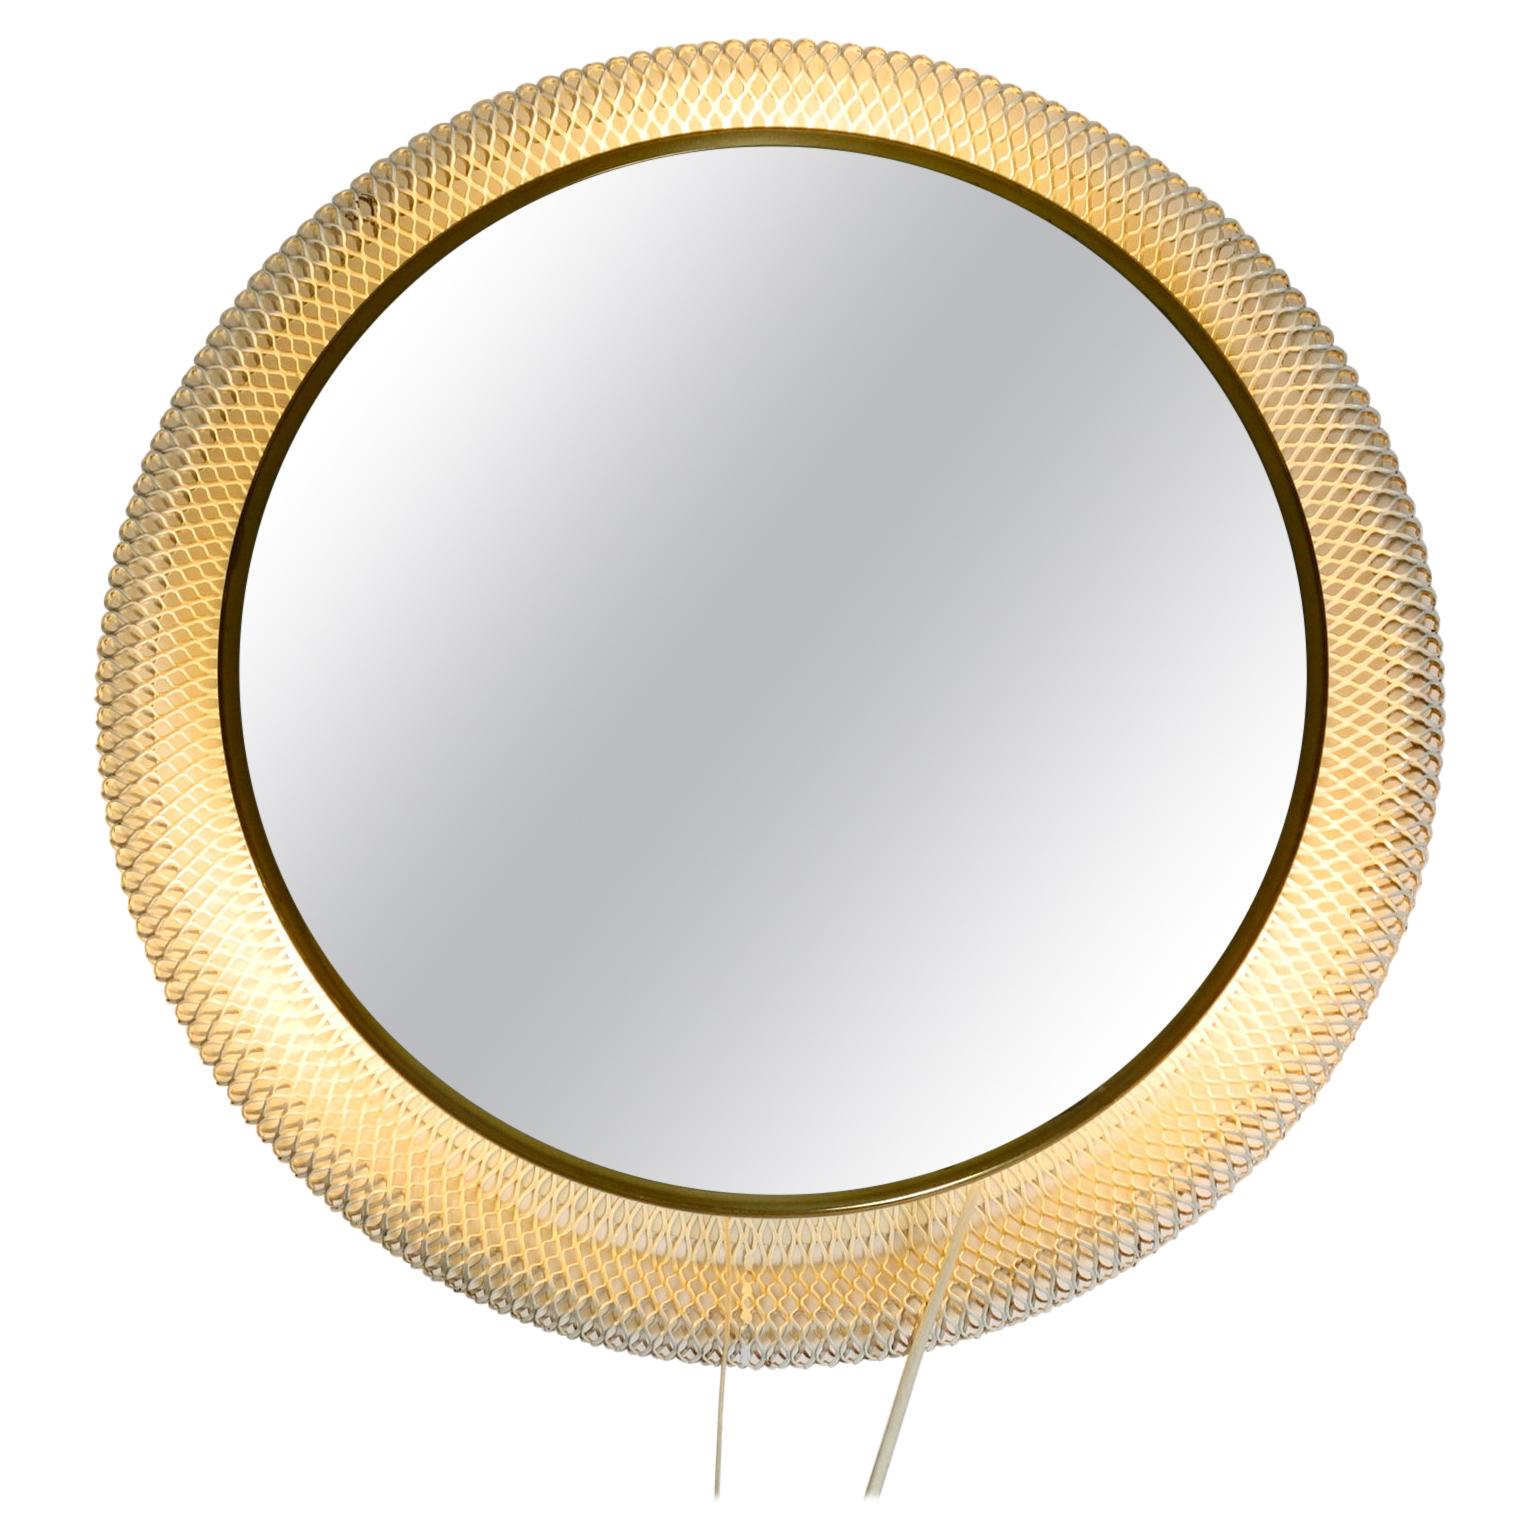 Illuminated Mid-Century Modern Round Wall Mirror with White Expanded Metal Frame